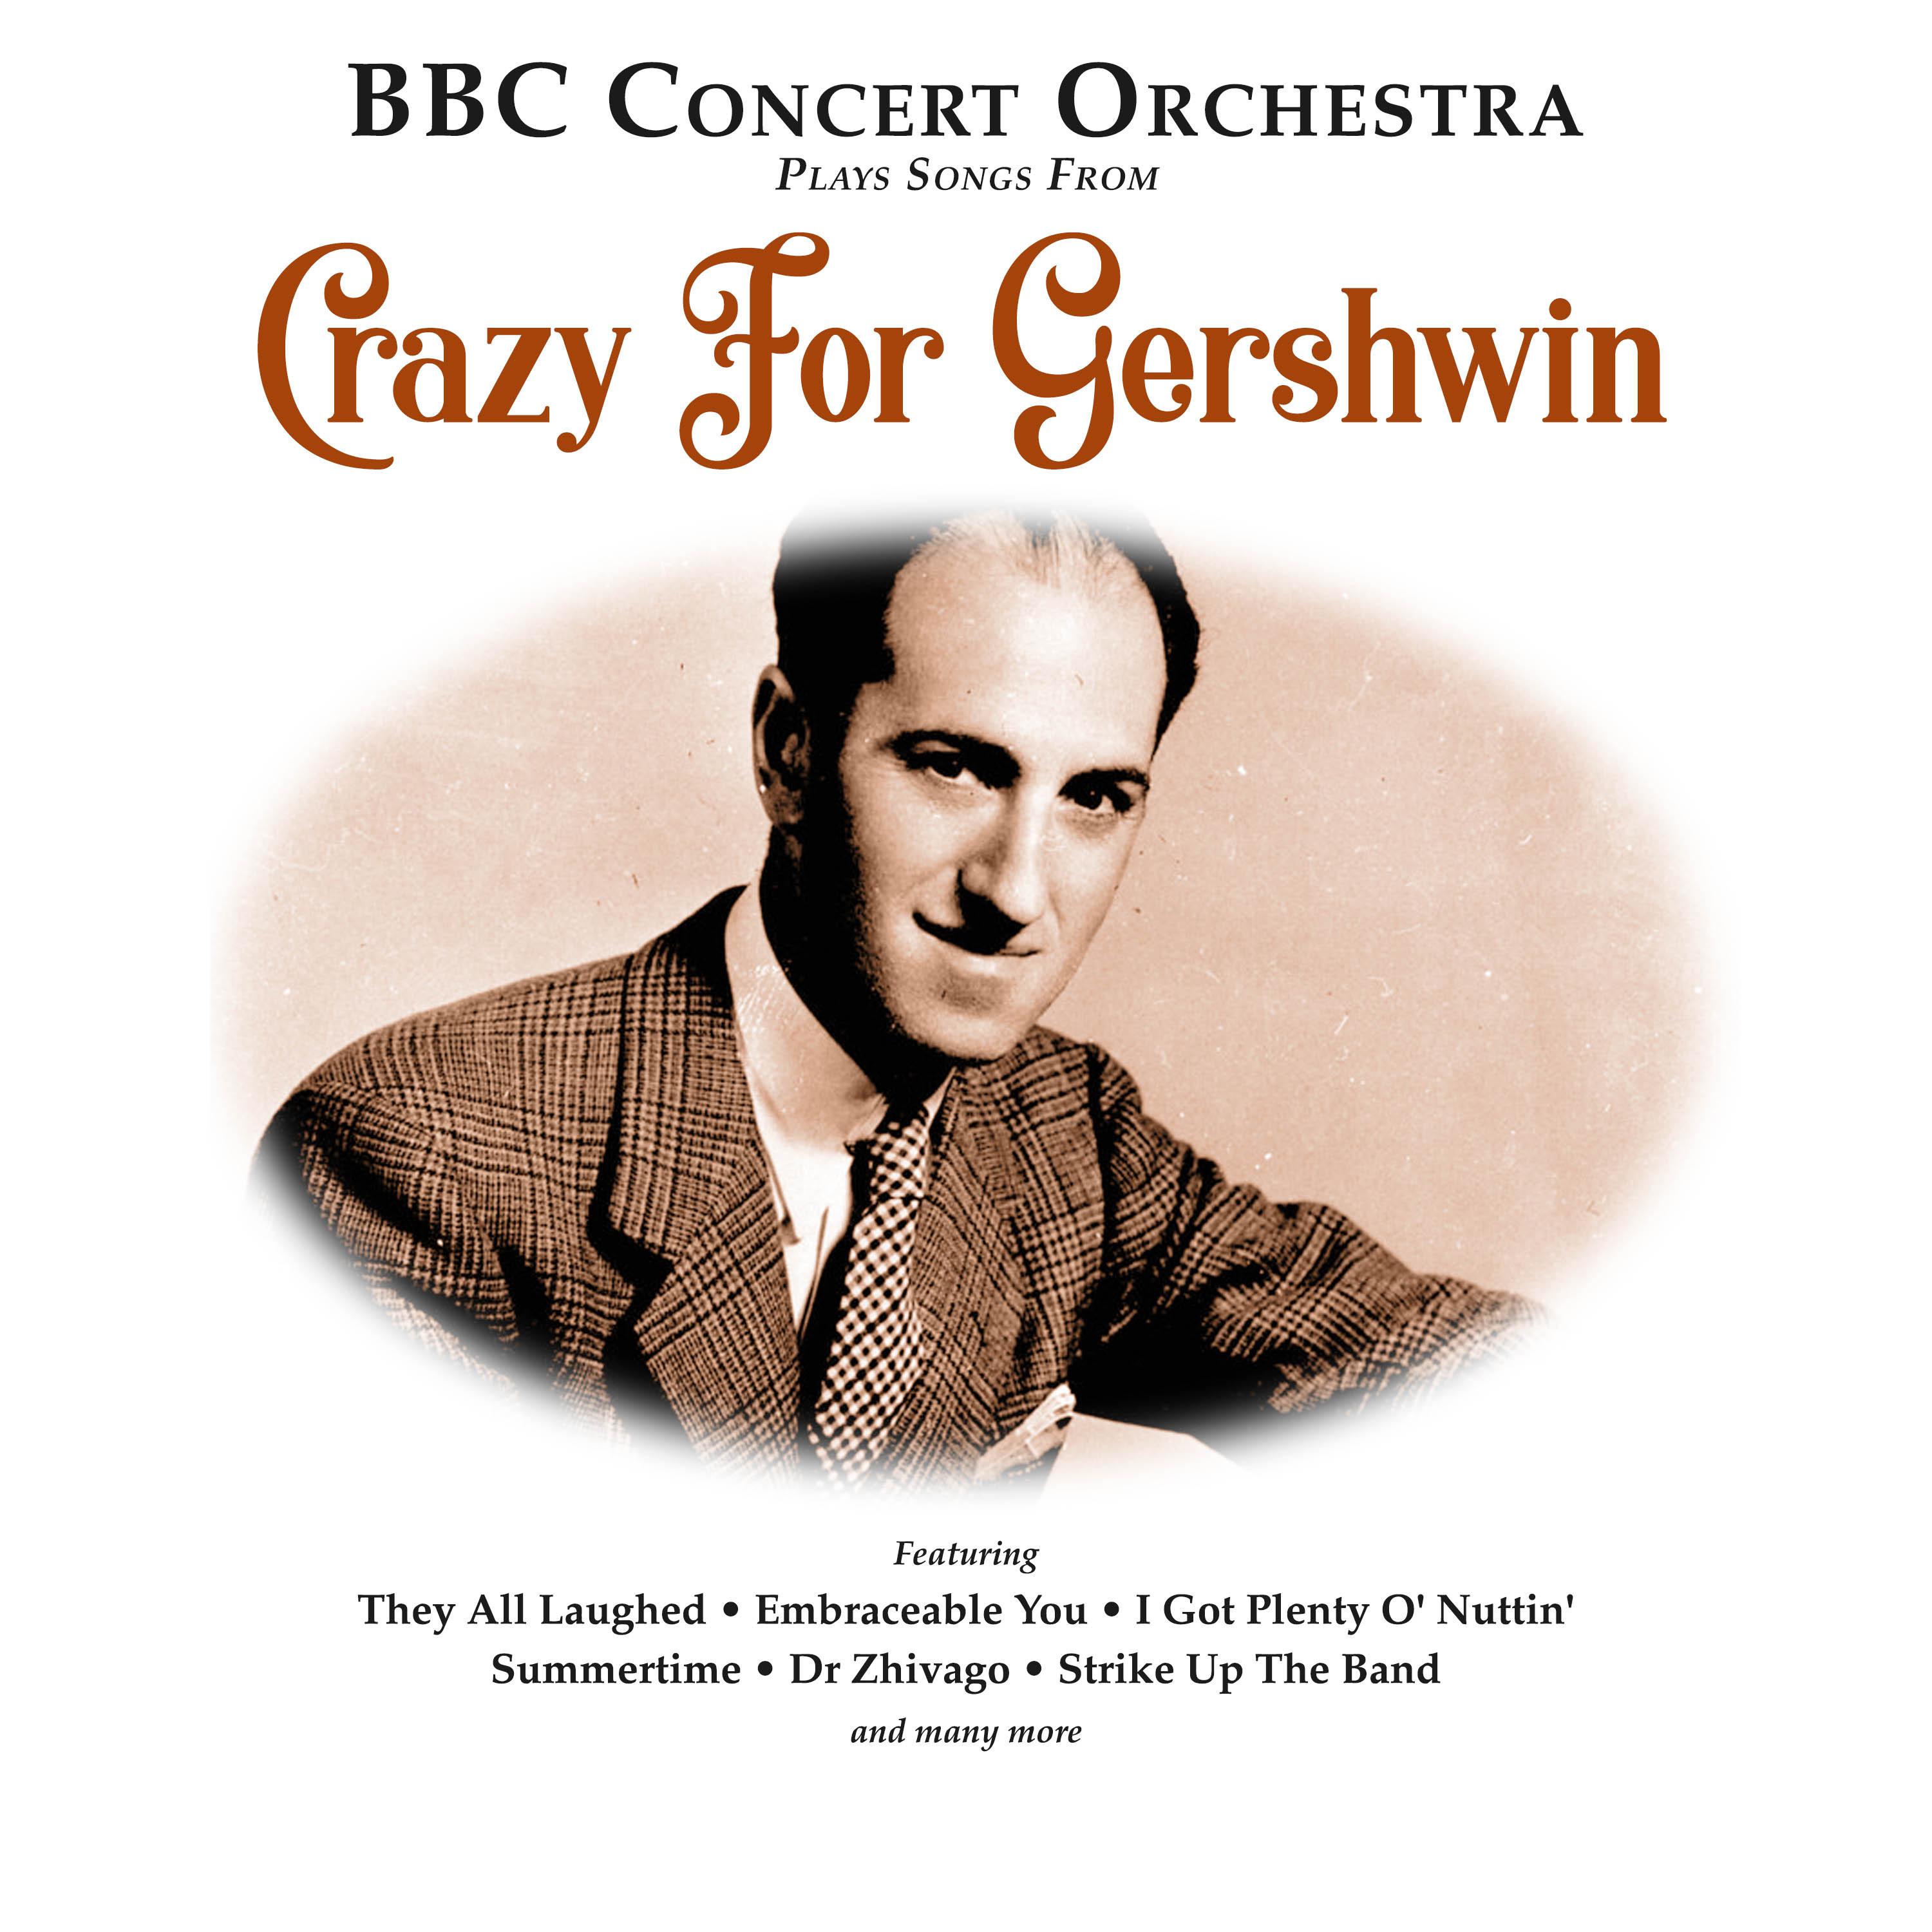 Crazy for Gershwin